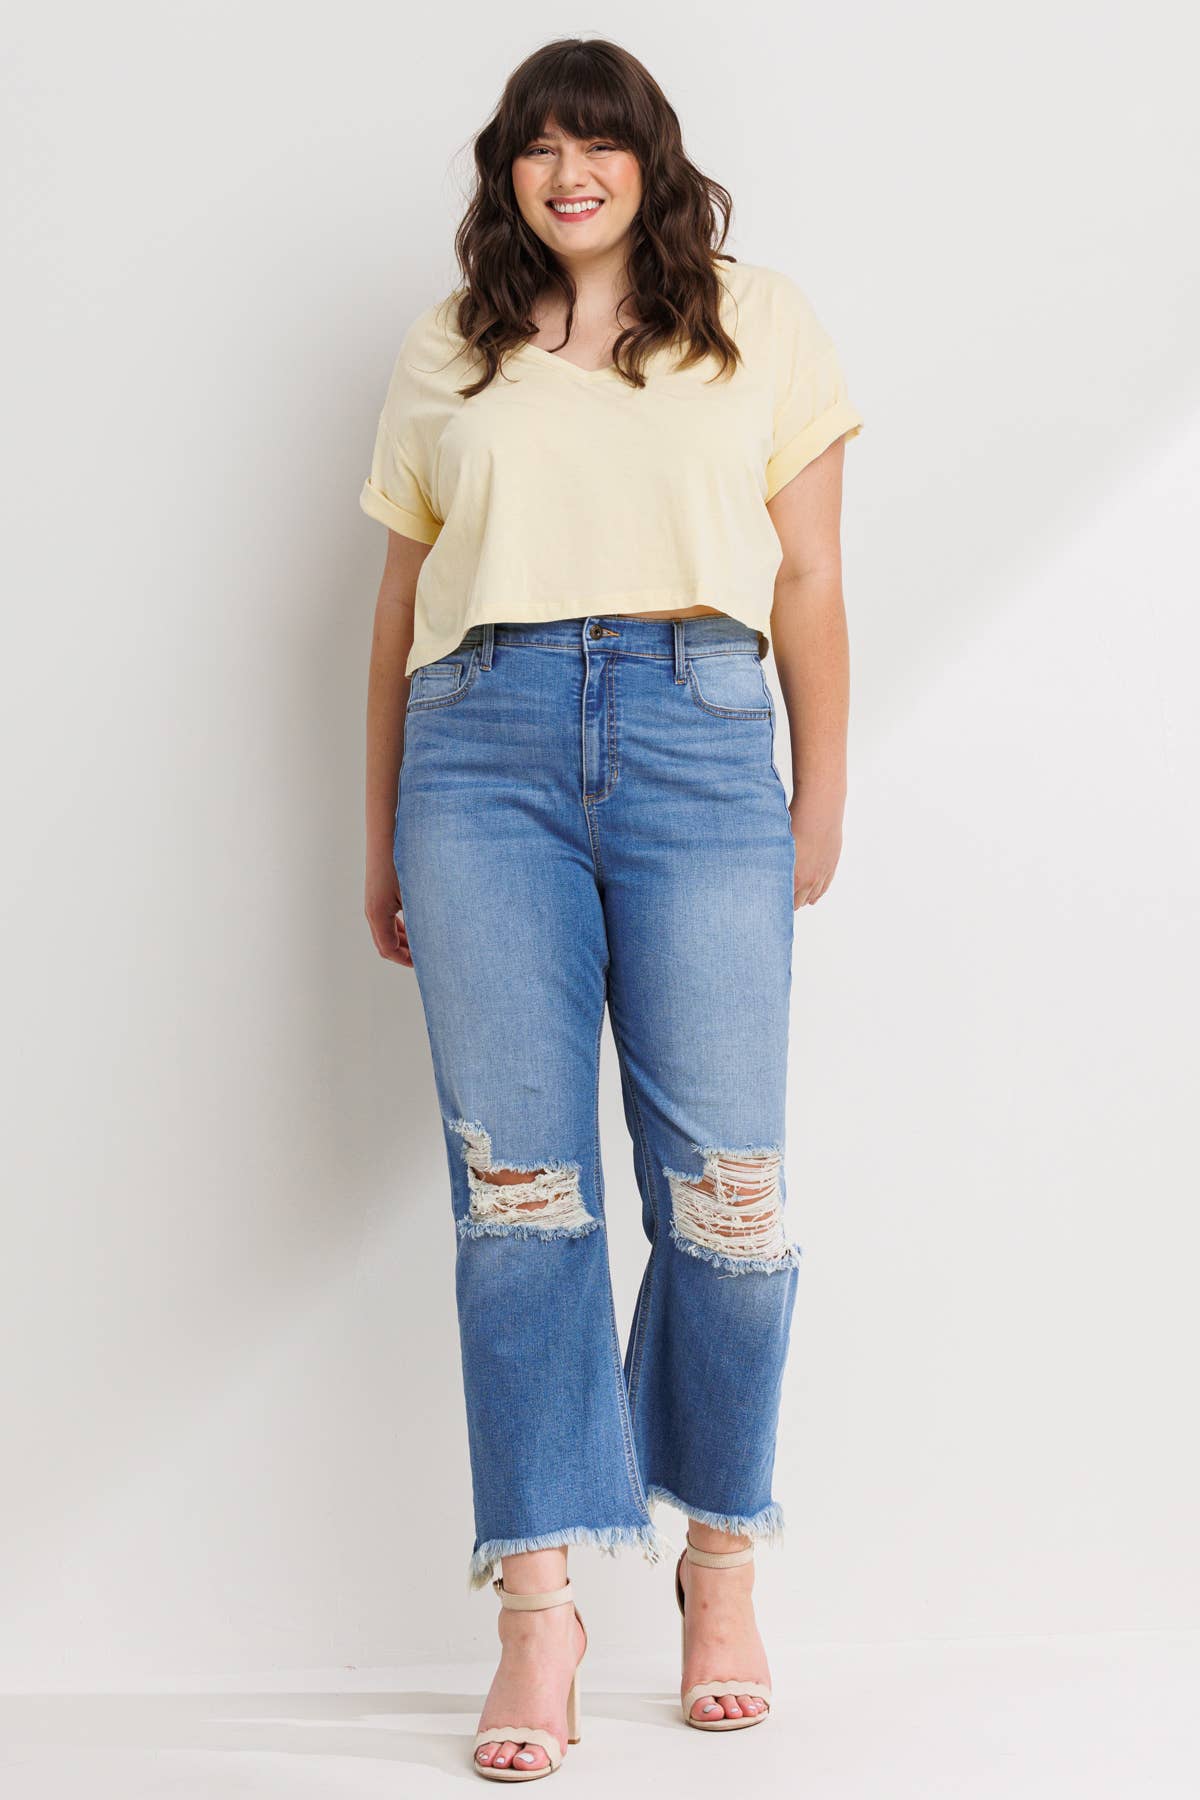 SneakPeek - High Rise Plus Size Straight Leg Jeans with Fray Hen and Distressed Knees